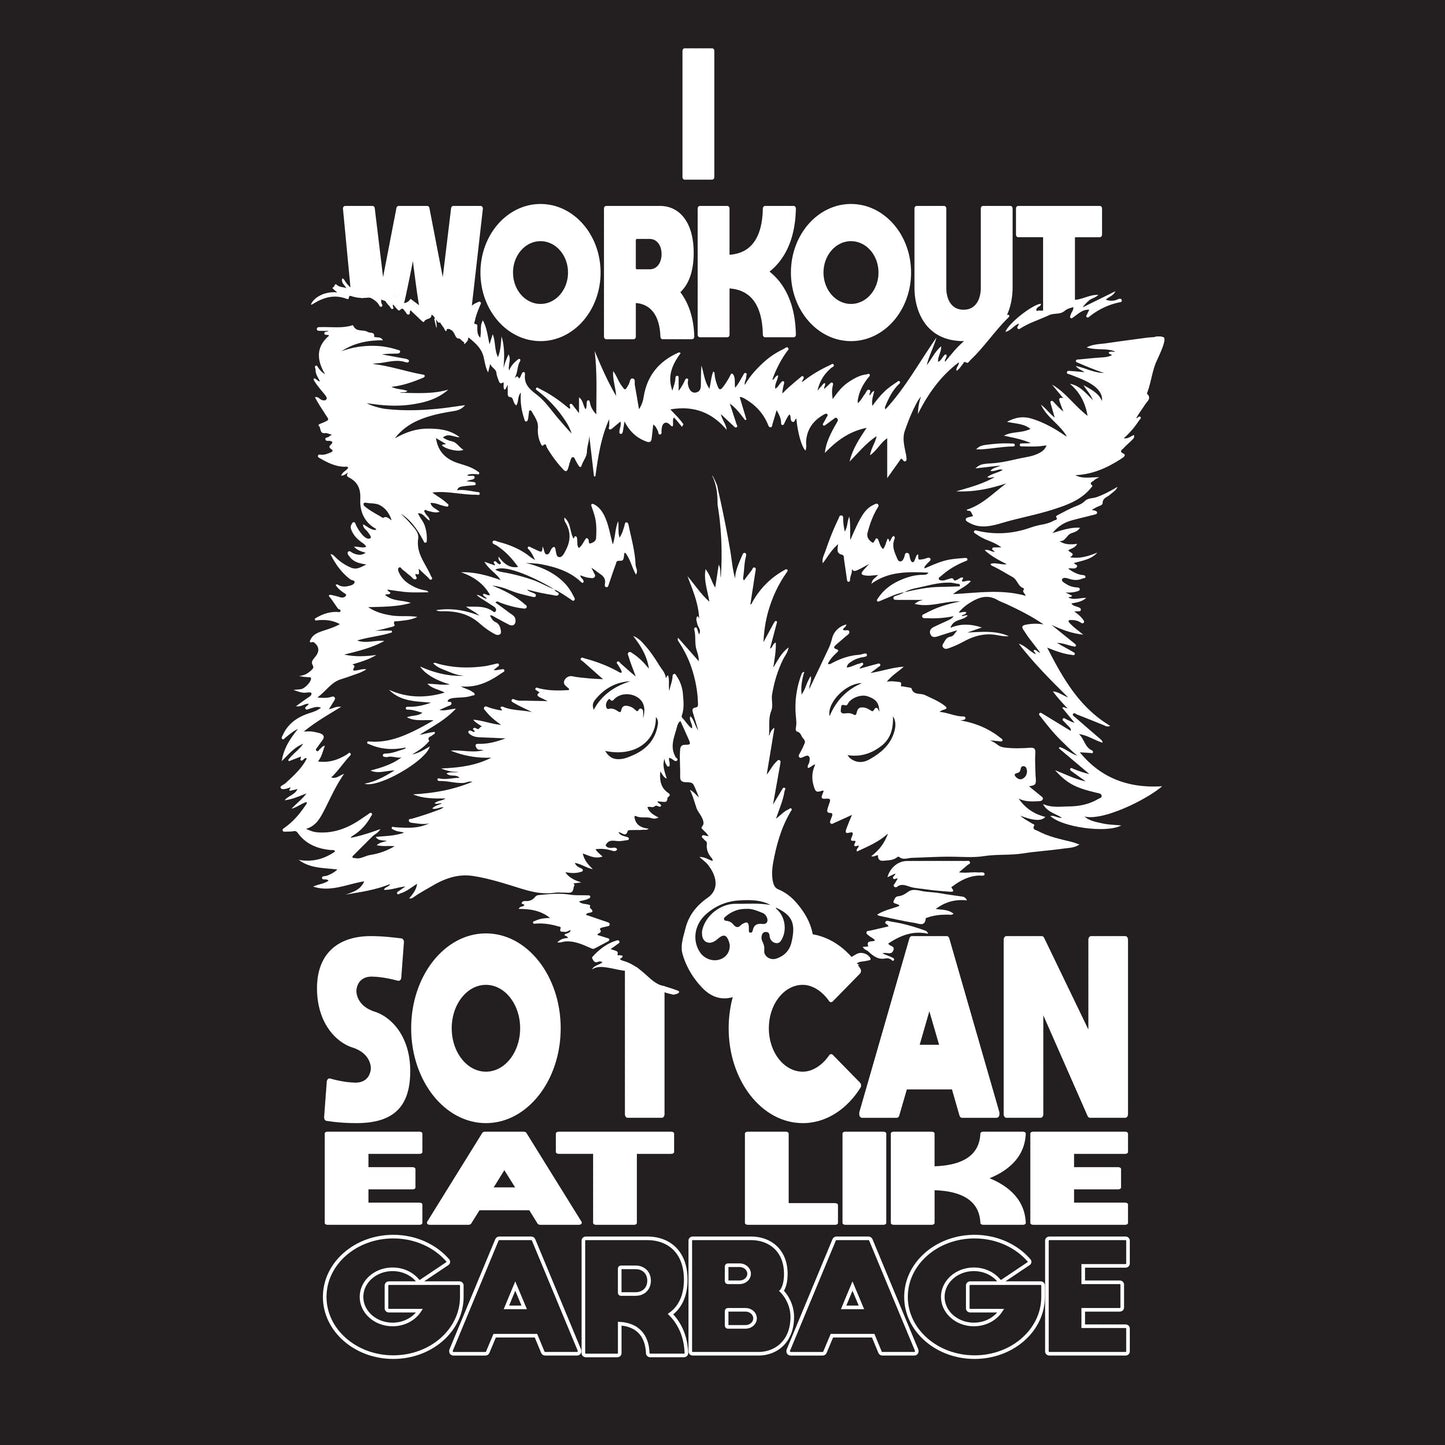 I Workout, So I Can Eat like Garbage